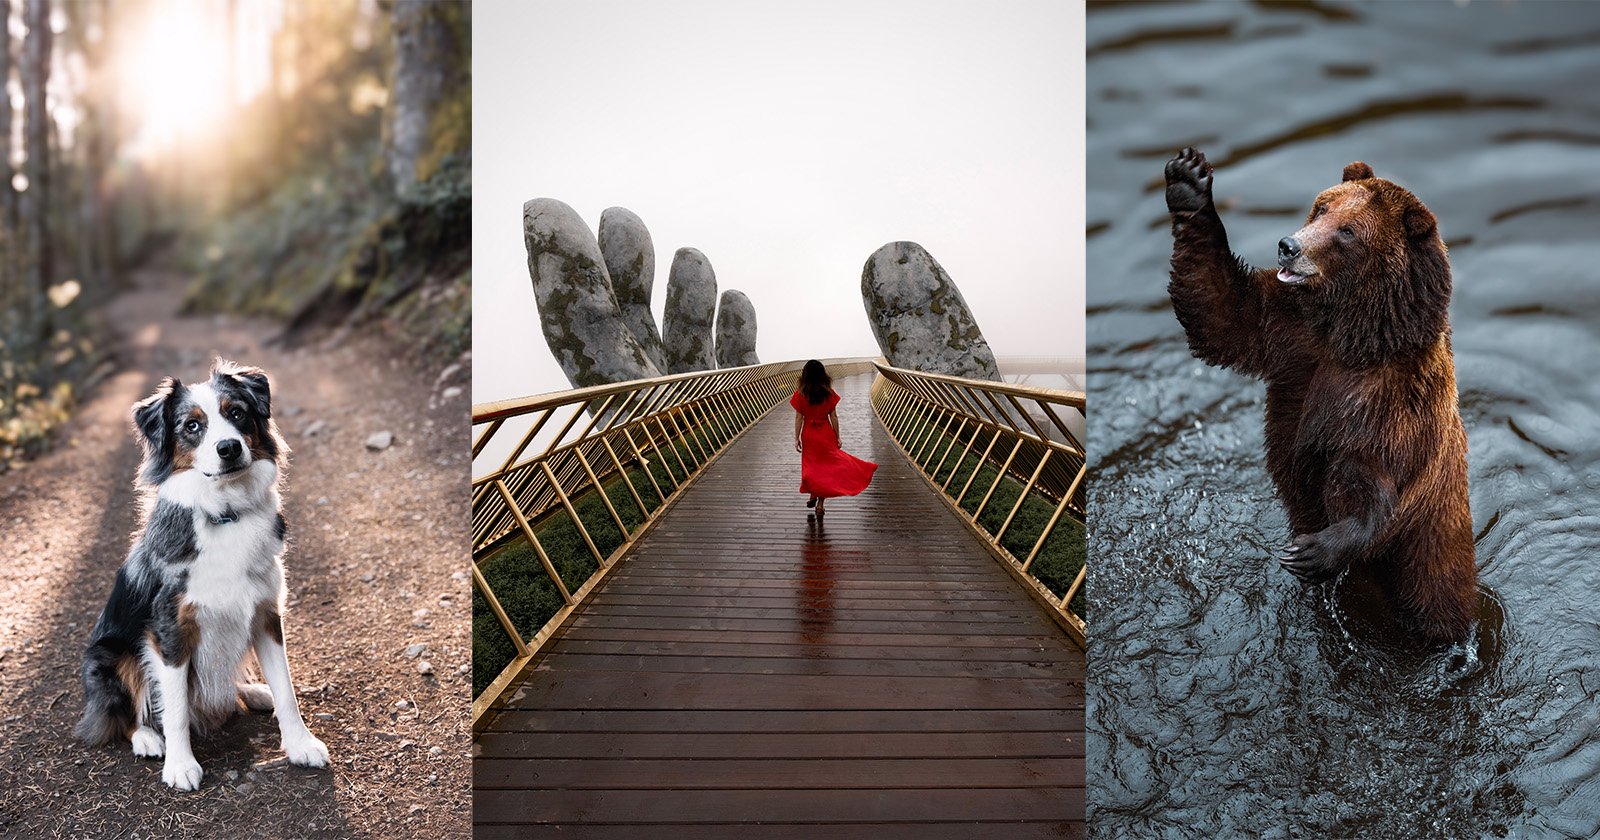 A collage of three images: a dog sitting on a forest trail, a person in a red coat walking on a bridge with large hand sculptures, and a bear standing in the water raising one of its paws.